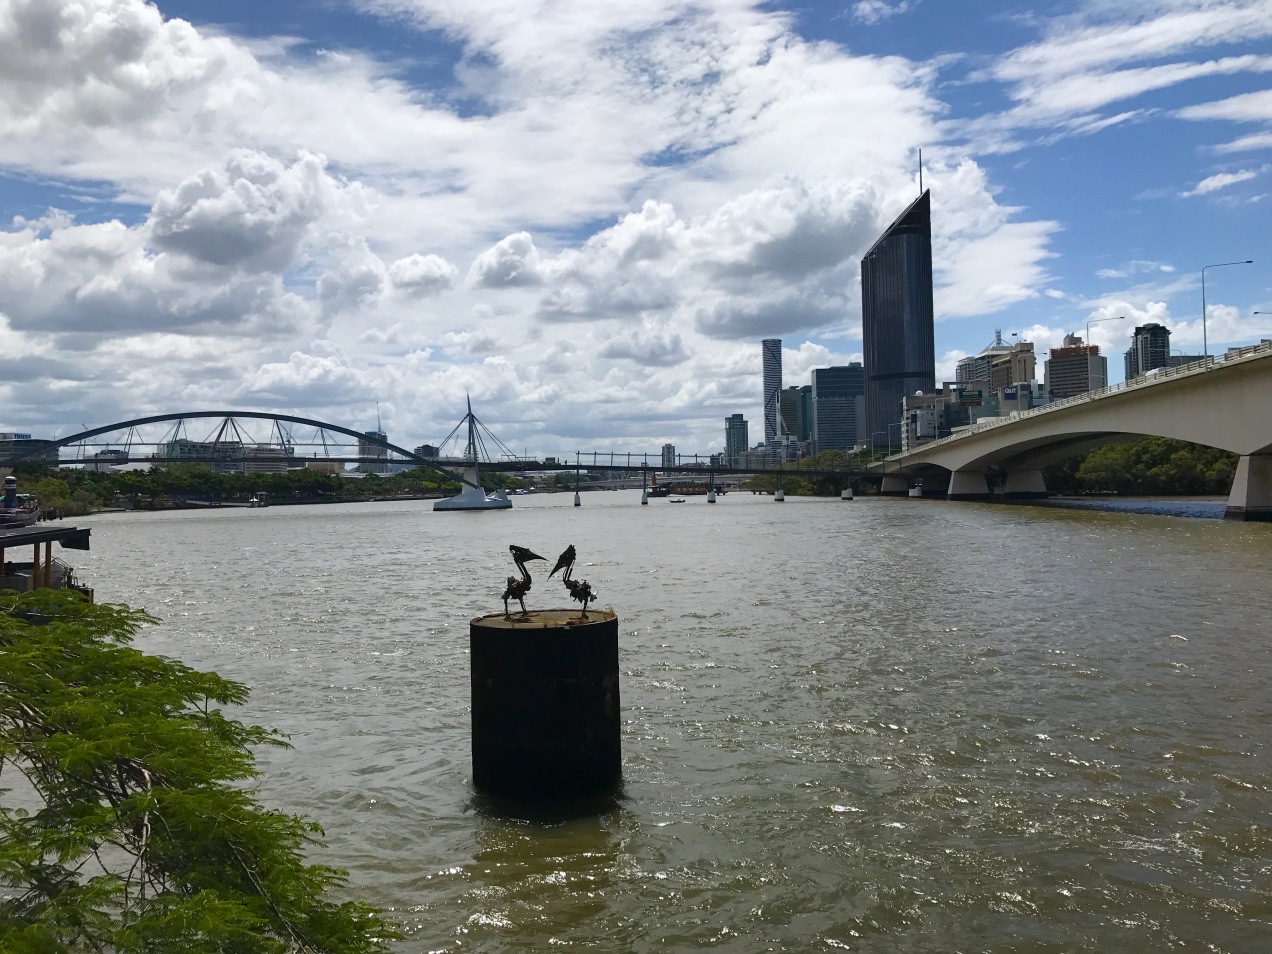 The view of the river, CBD, and South Bank from Kangaroo Point featuring an...erm...interesting species of pelican